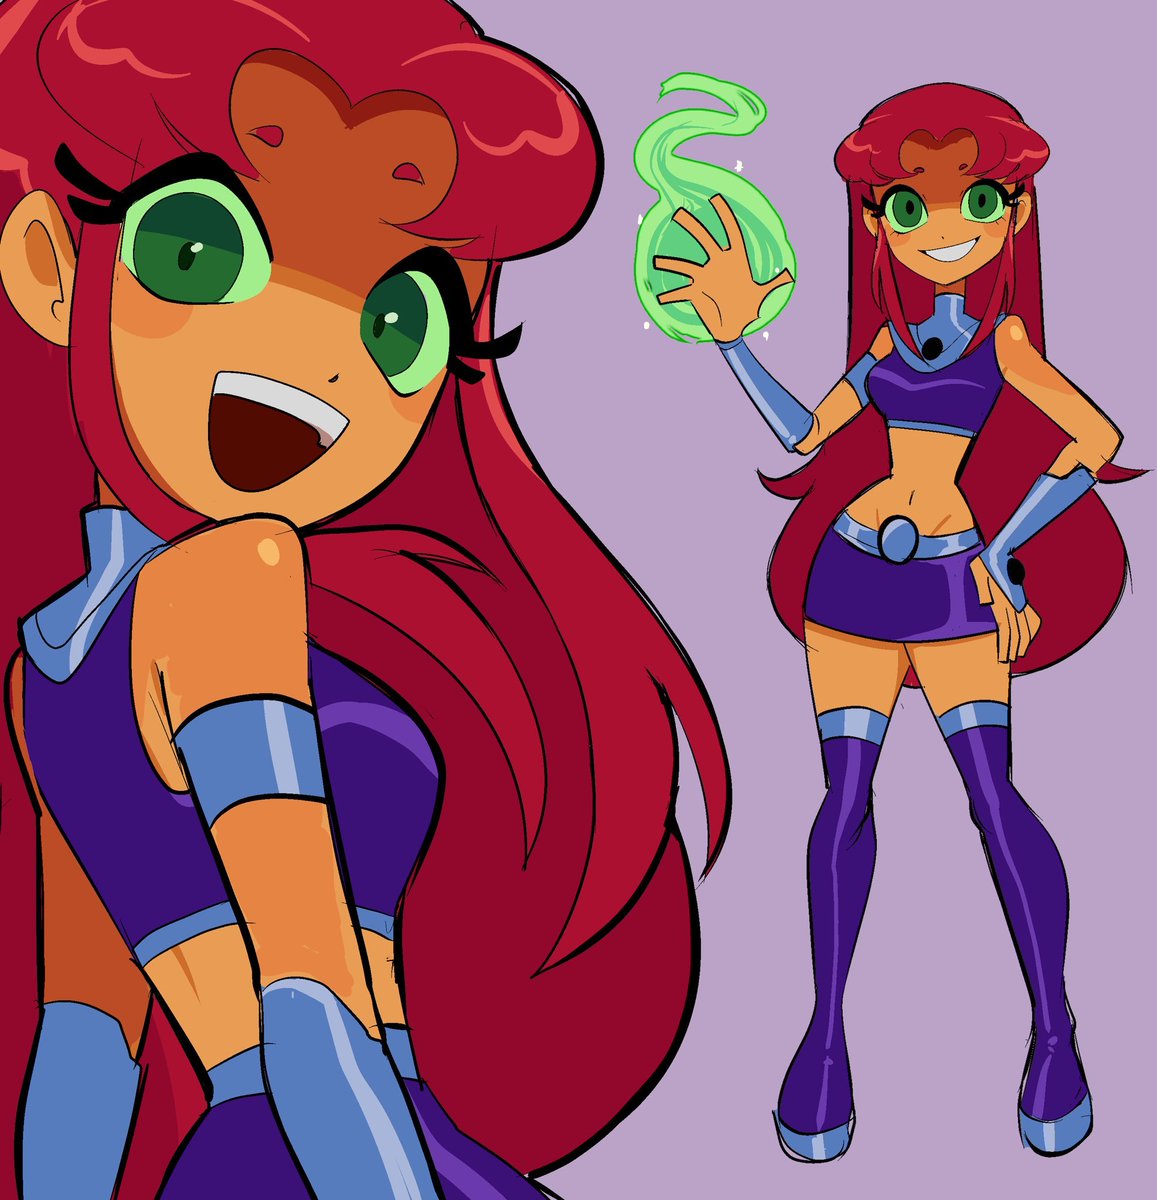 is. s take on Starfire from Teen Titans. 